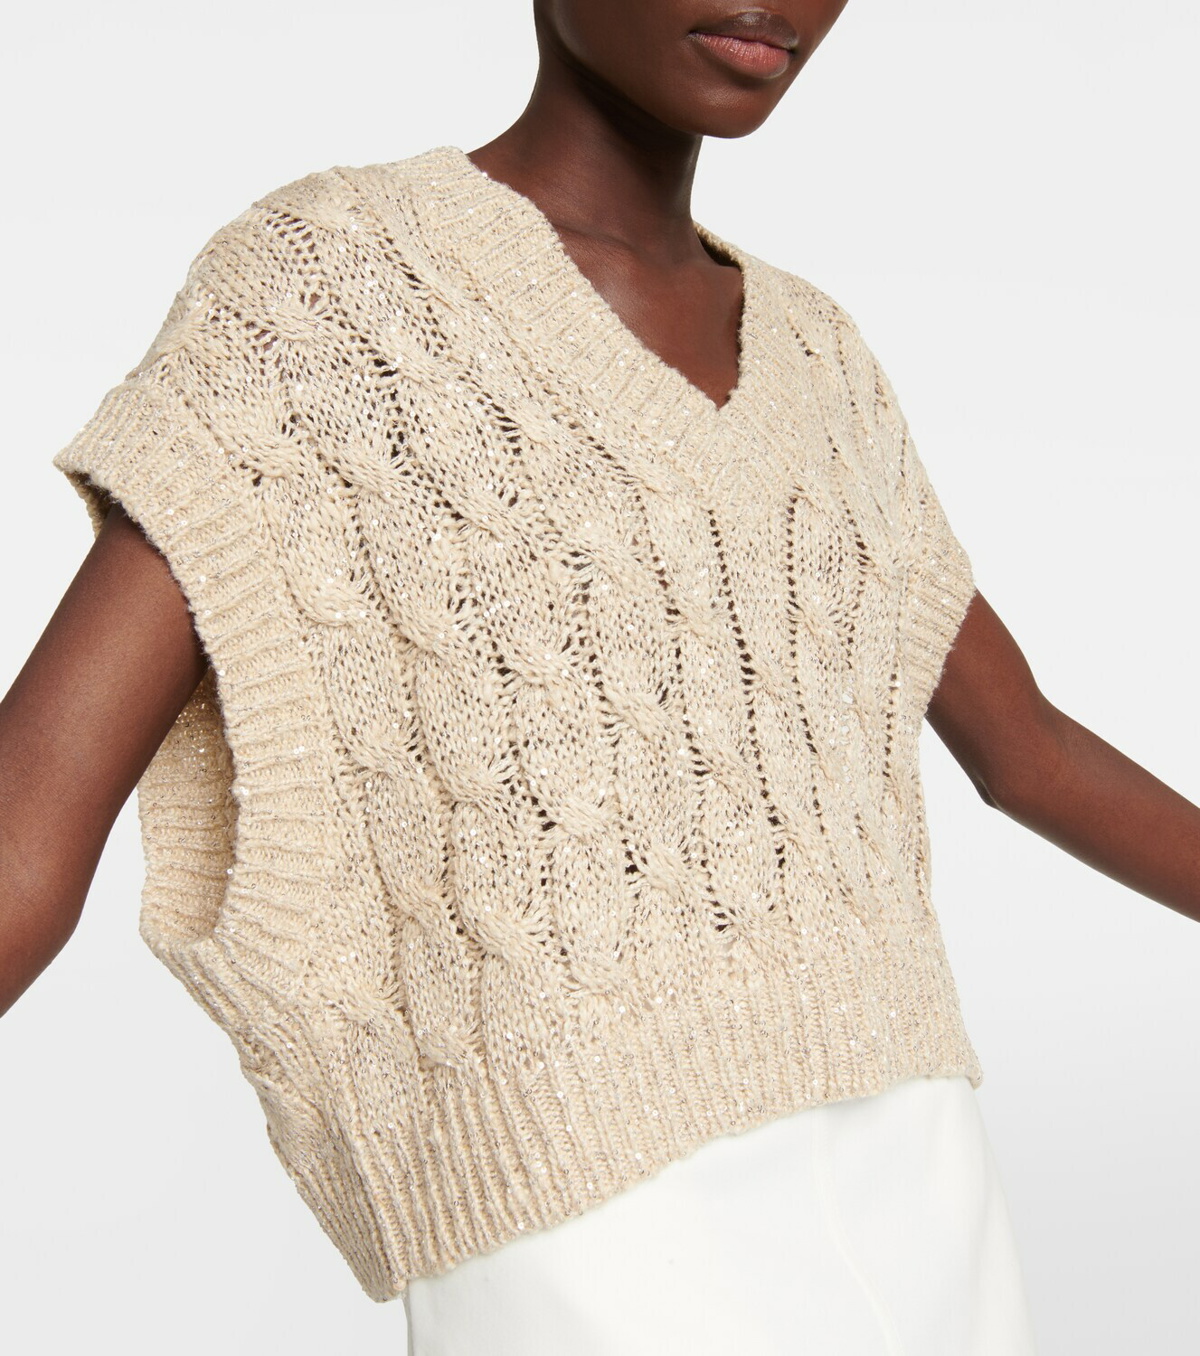 16 Modern Cable Knitting Patterns (Sweaters, Vests, & More)